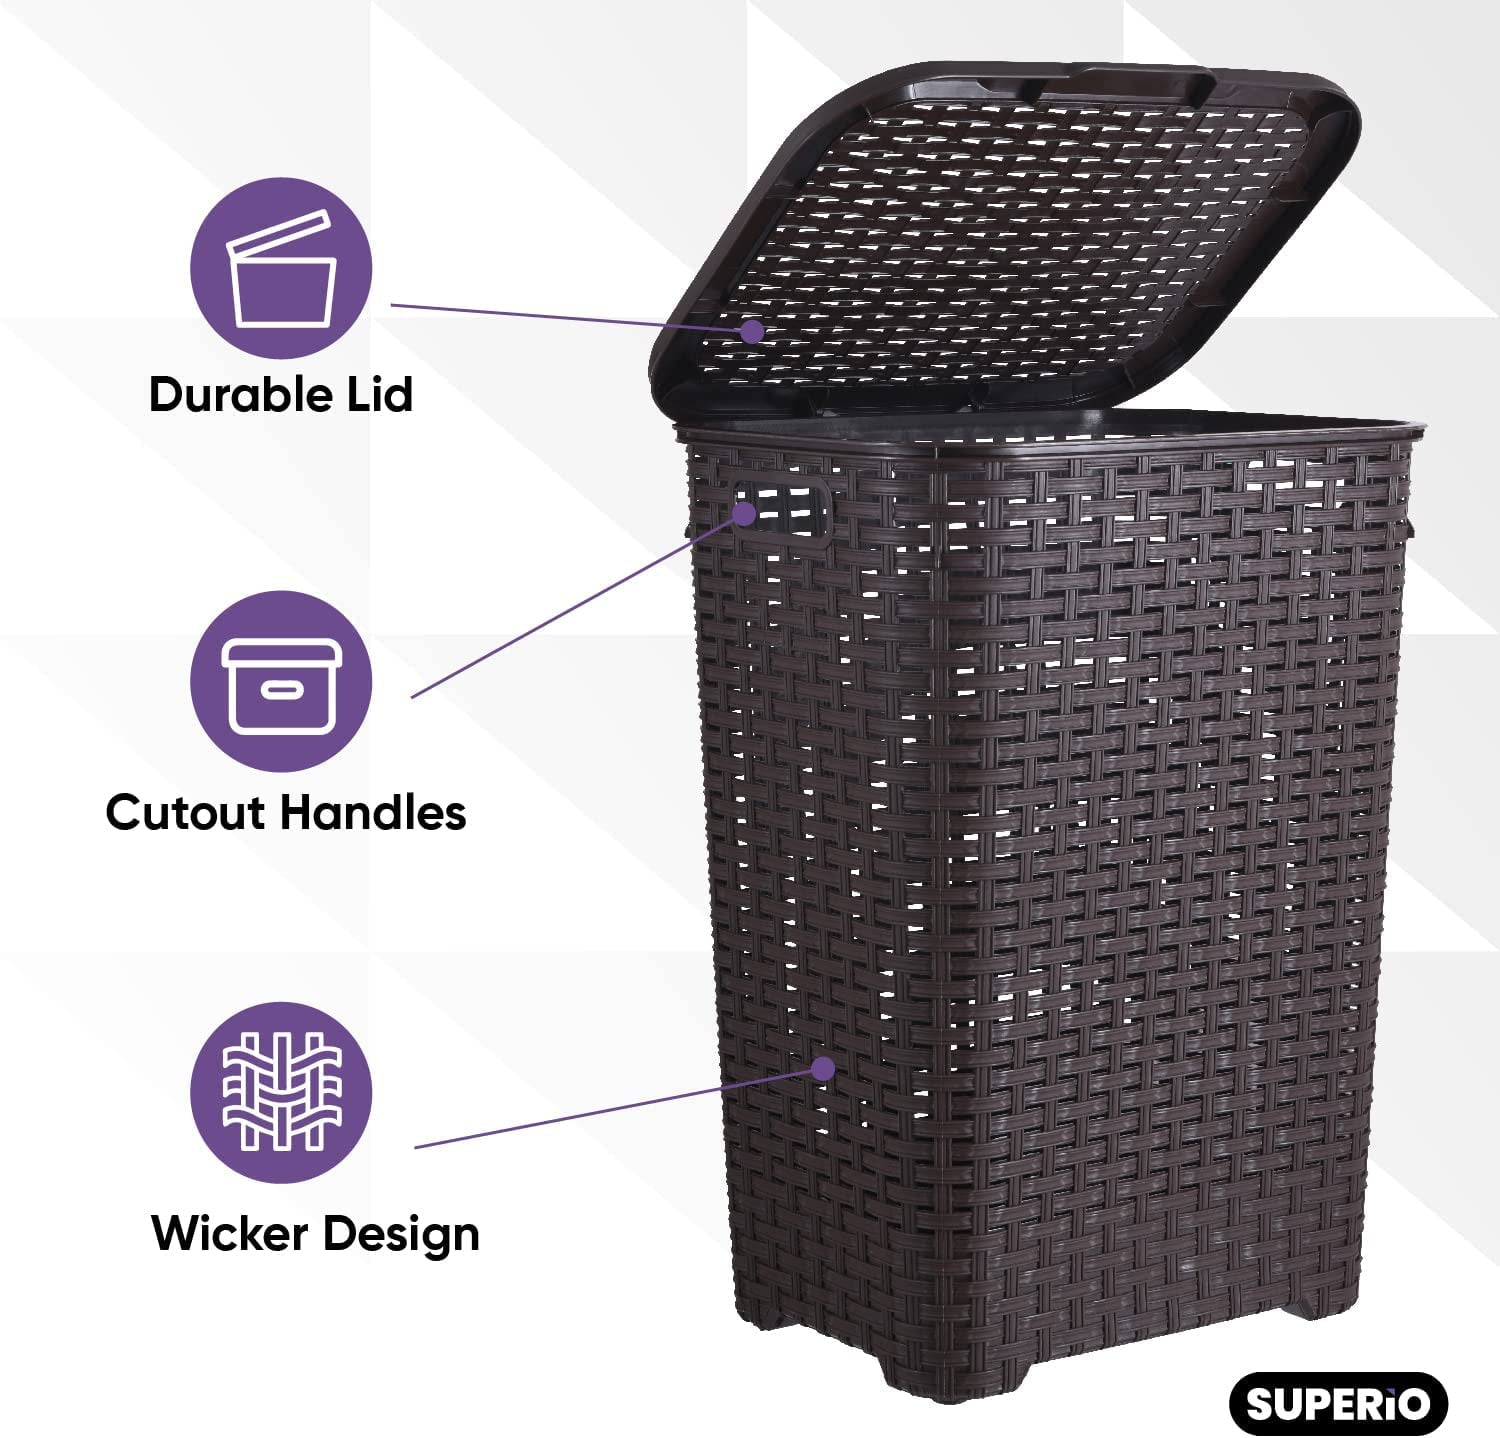 Superio Brand 60L Large Wicker Plastic Laundry Hamper with Lid - Brown